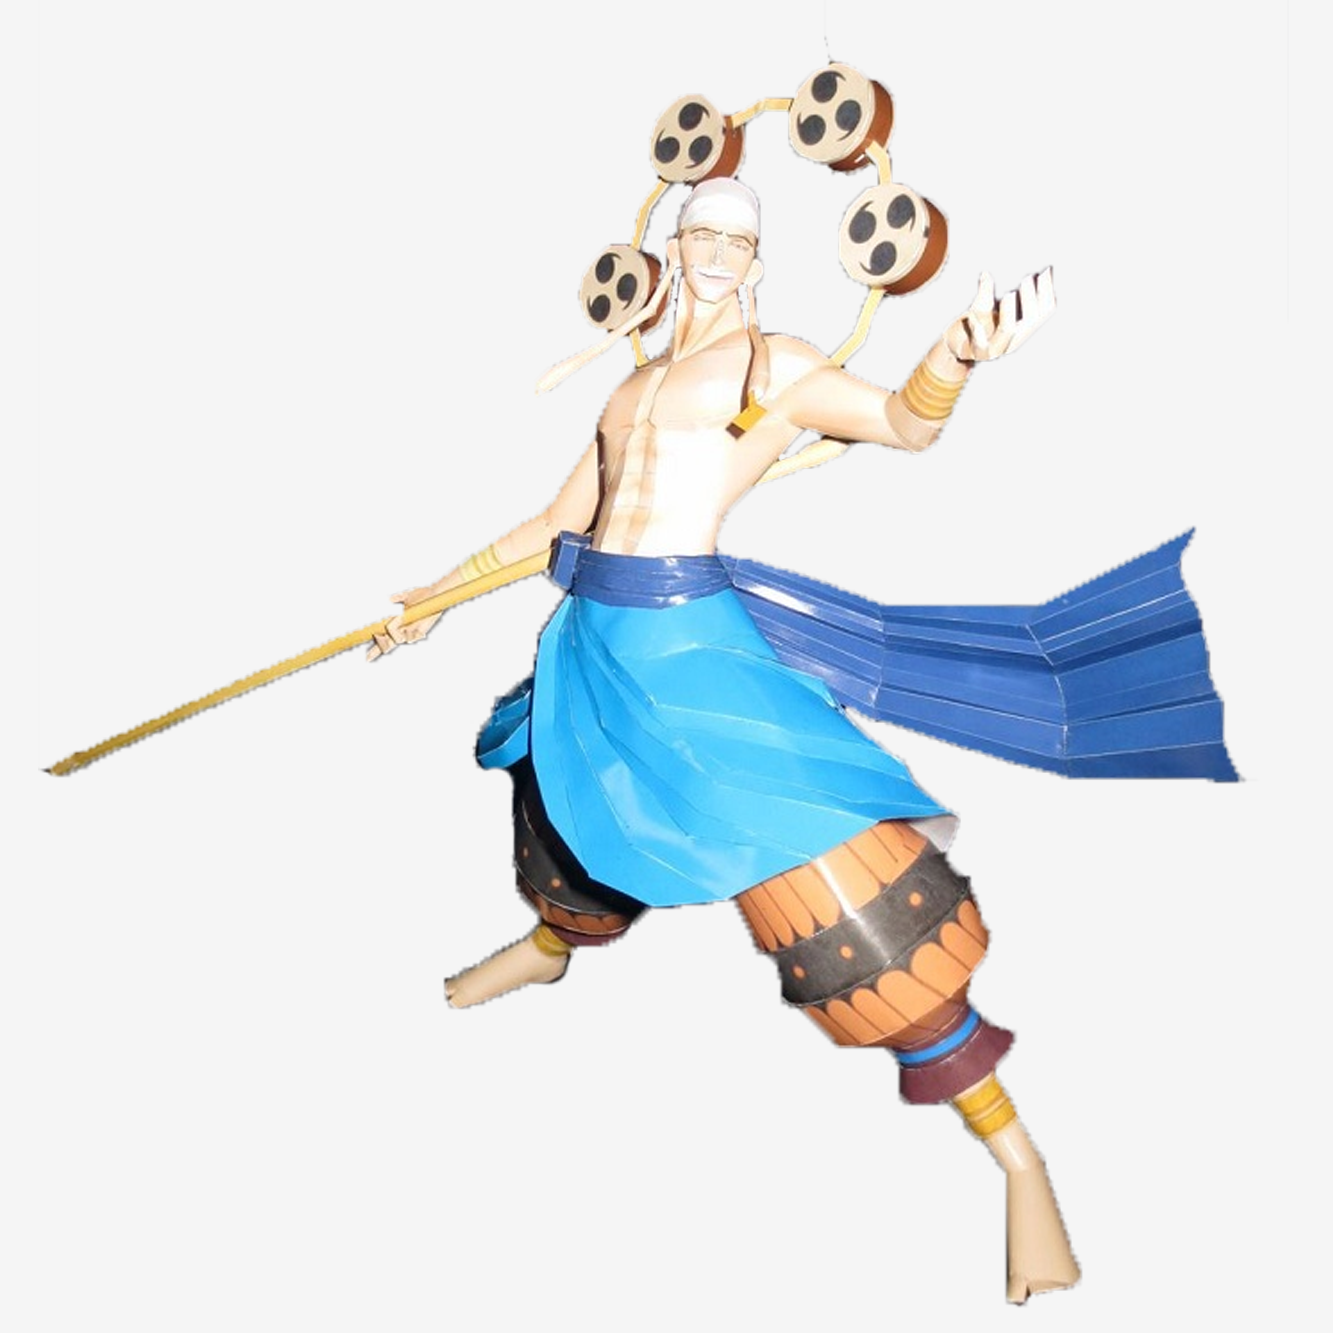 [One Piece] Enel